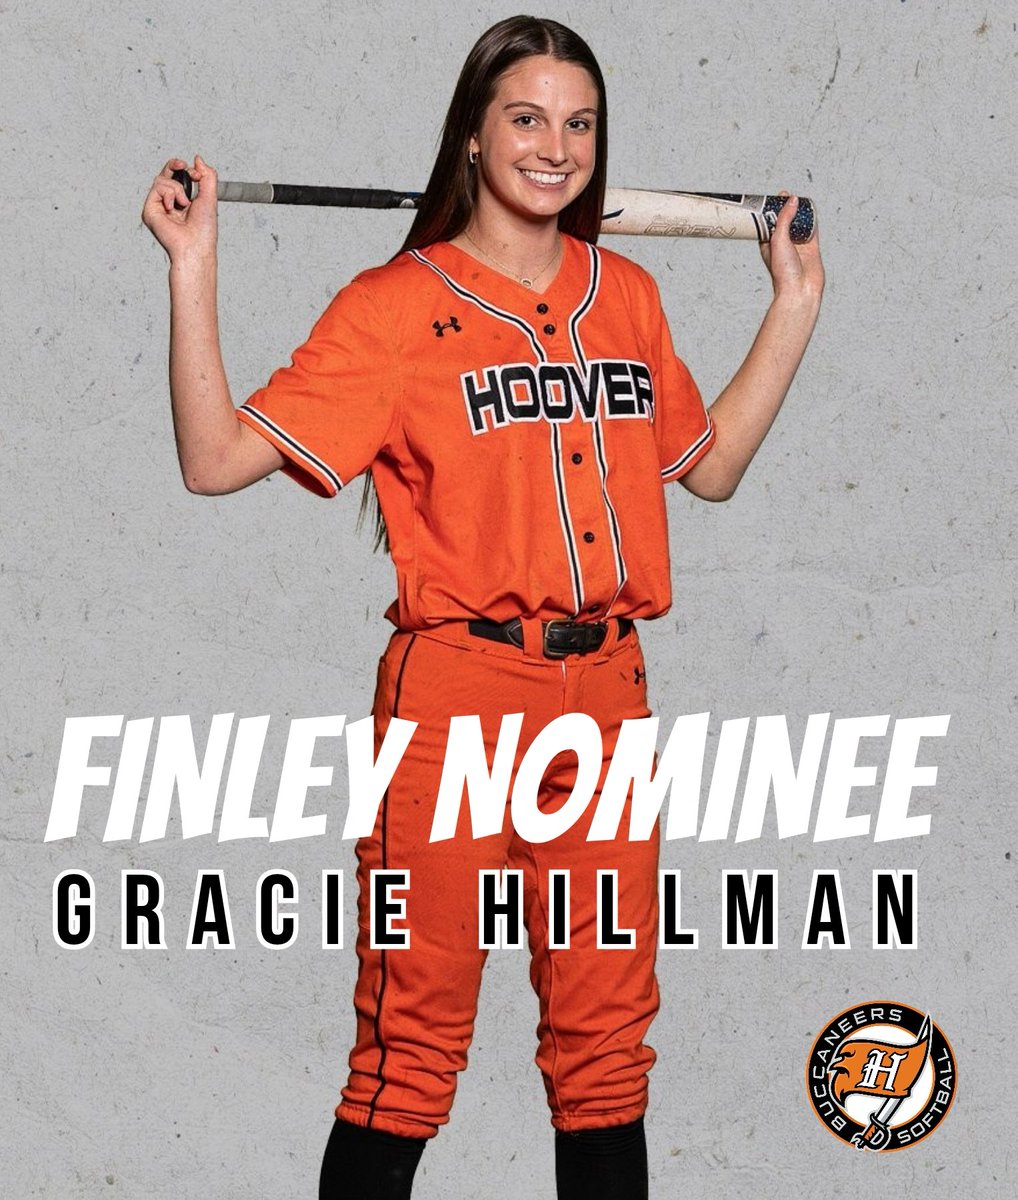 Congrats to Gracie - nominated for the Finley Award. This is a tribute to Coach Finley’s character and legacy as a way to recognize outstanding character found within Hoover City Schools. She is well deserving of this award as she is a humble teammate and is a tireless worker!